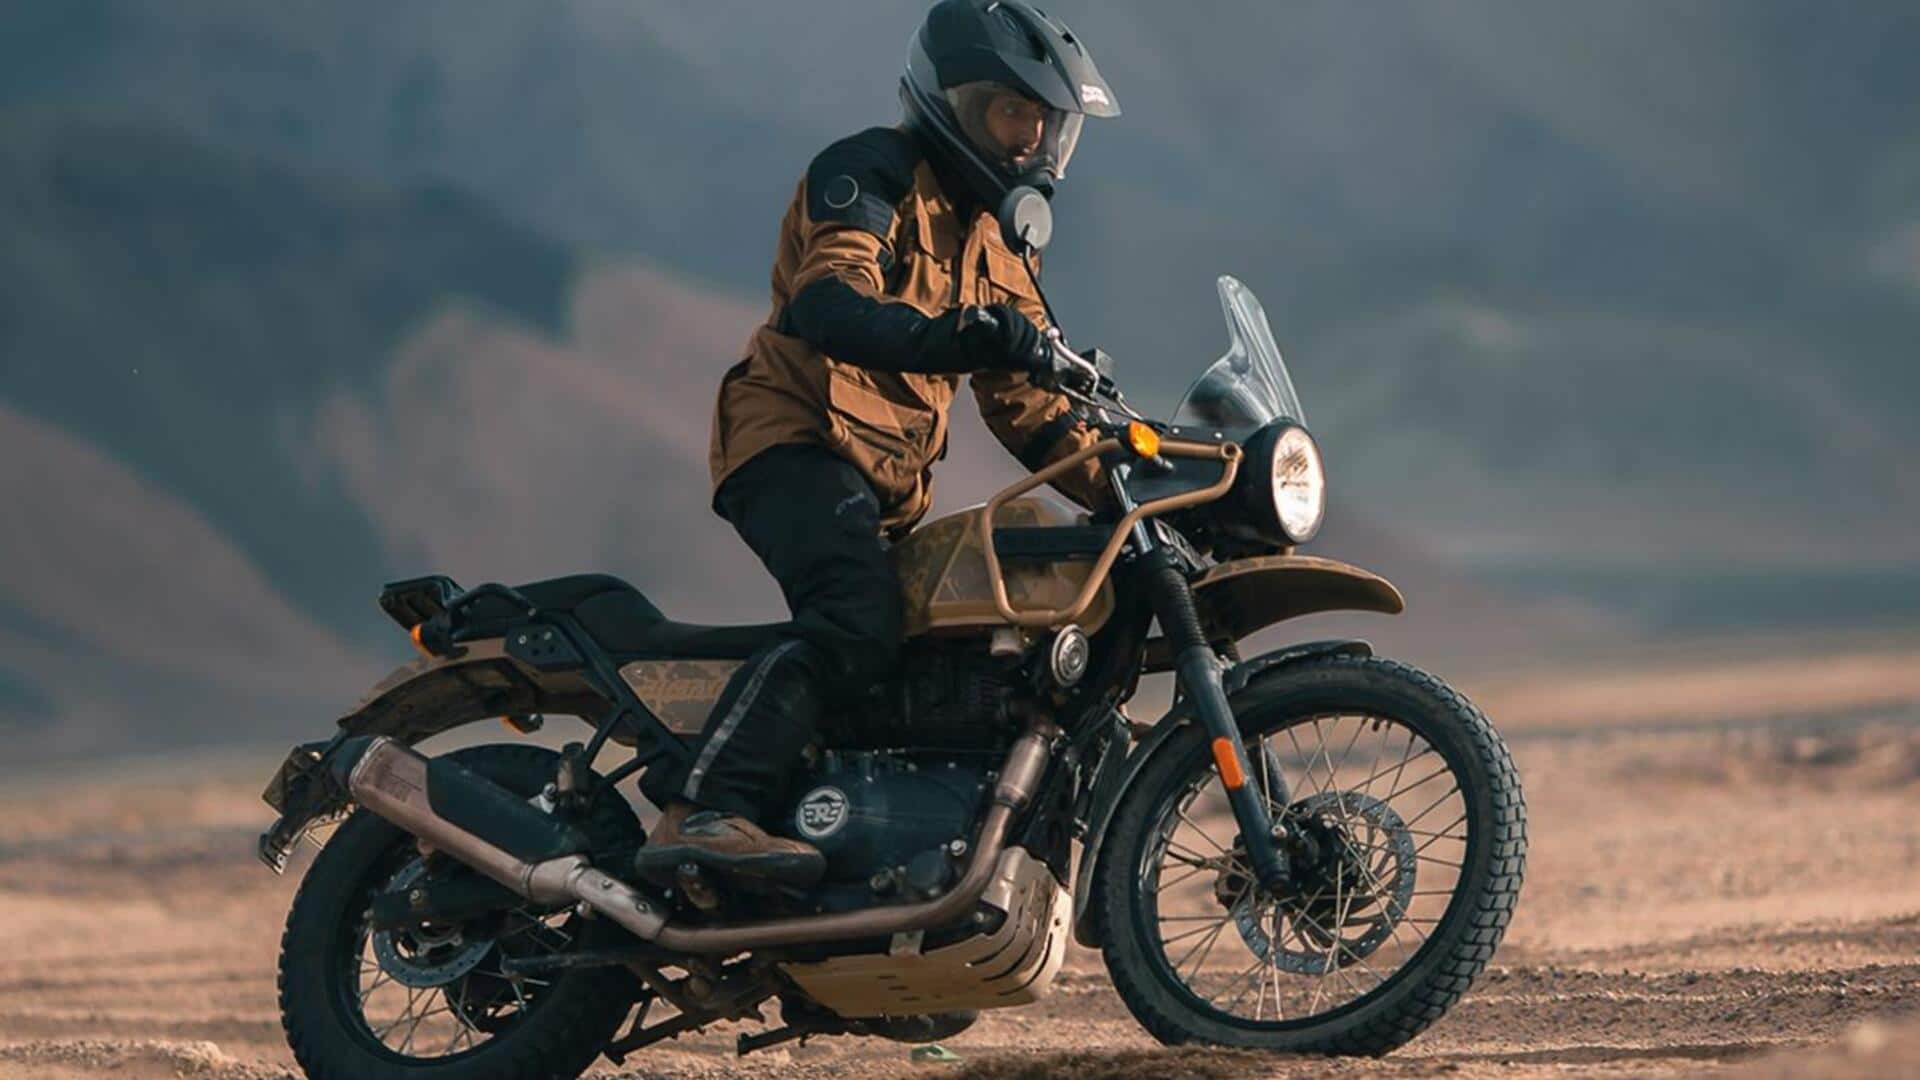 Prior to launch, Royal Enfield Himalayan 452's specifications leaked